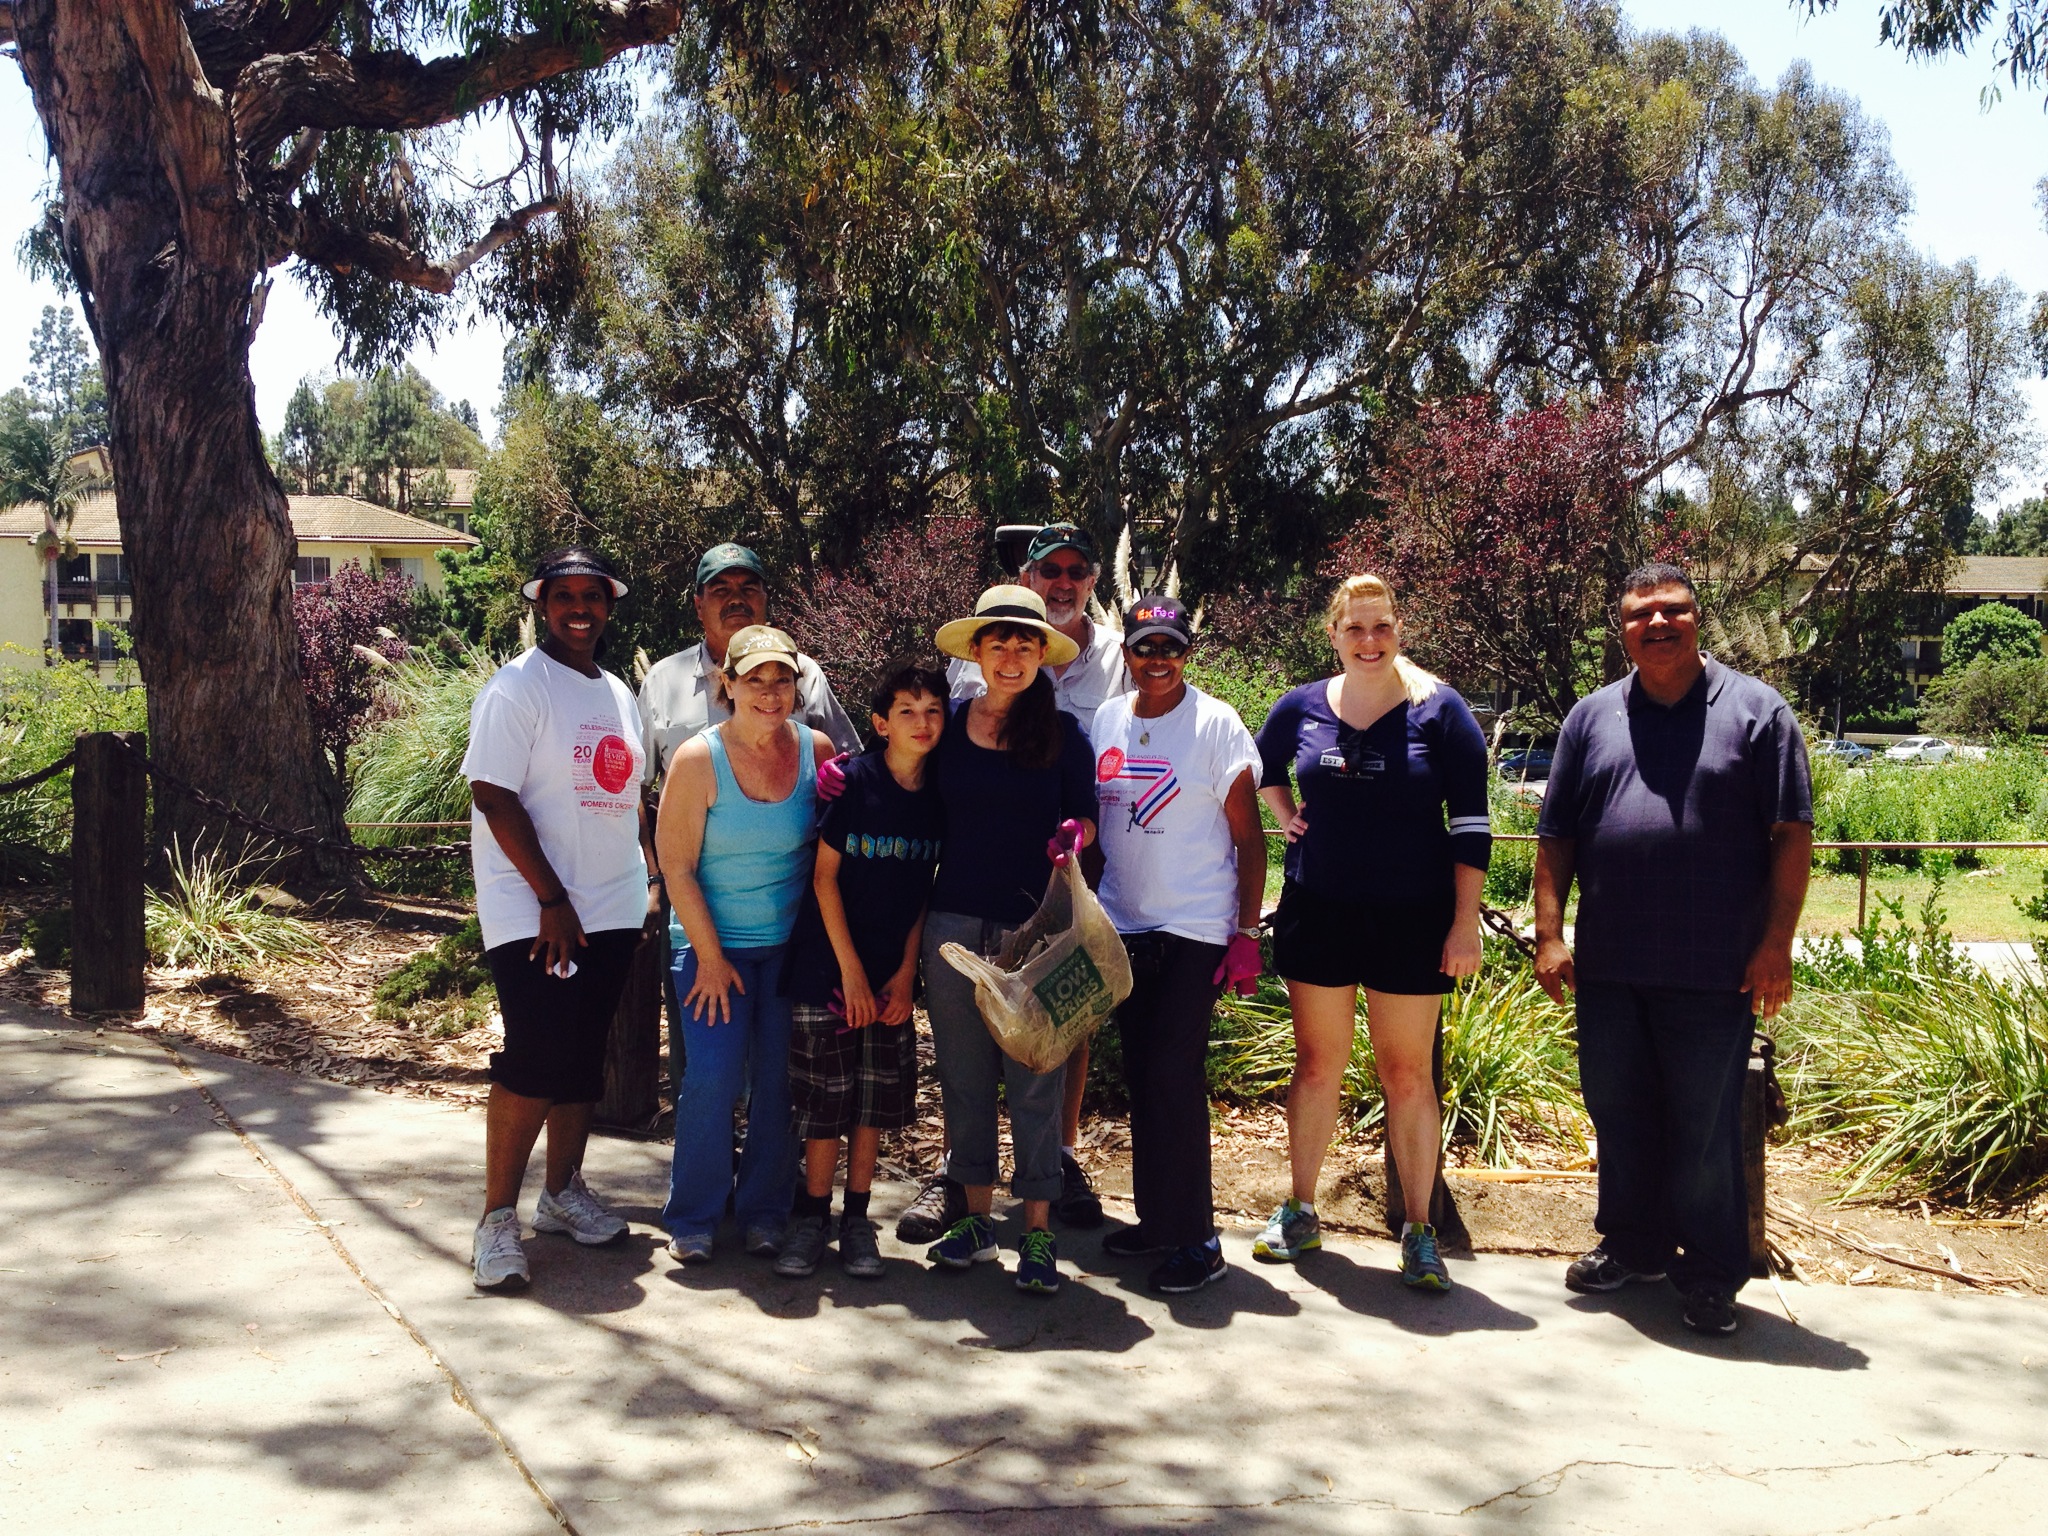 2014 Annual Fox Hills Park Cleanup Day